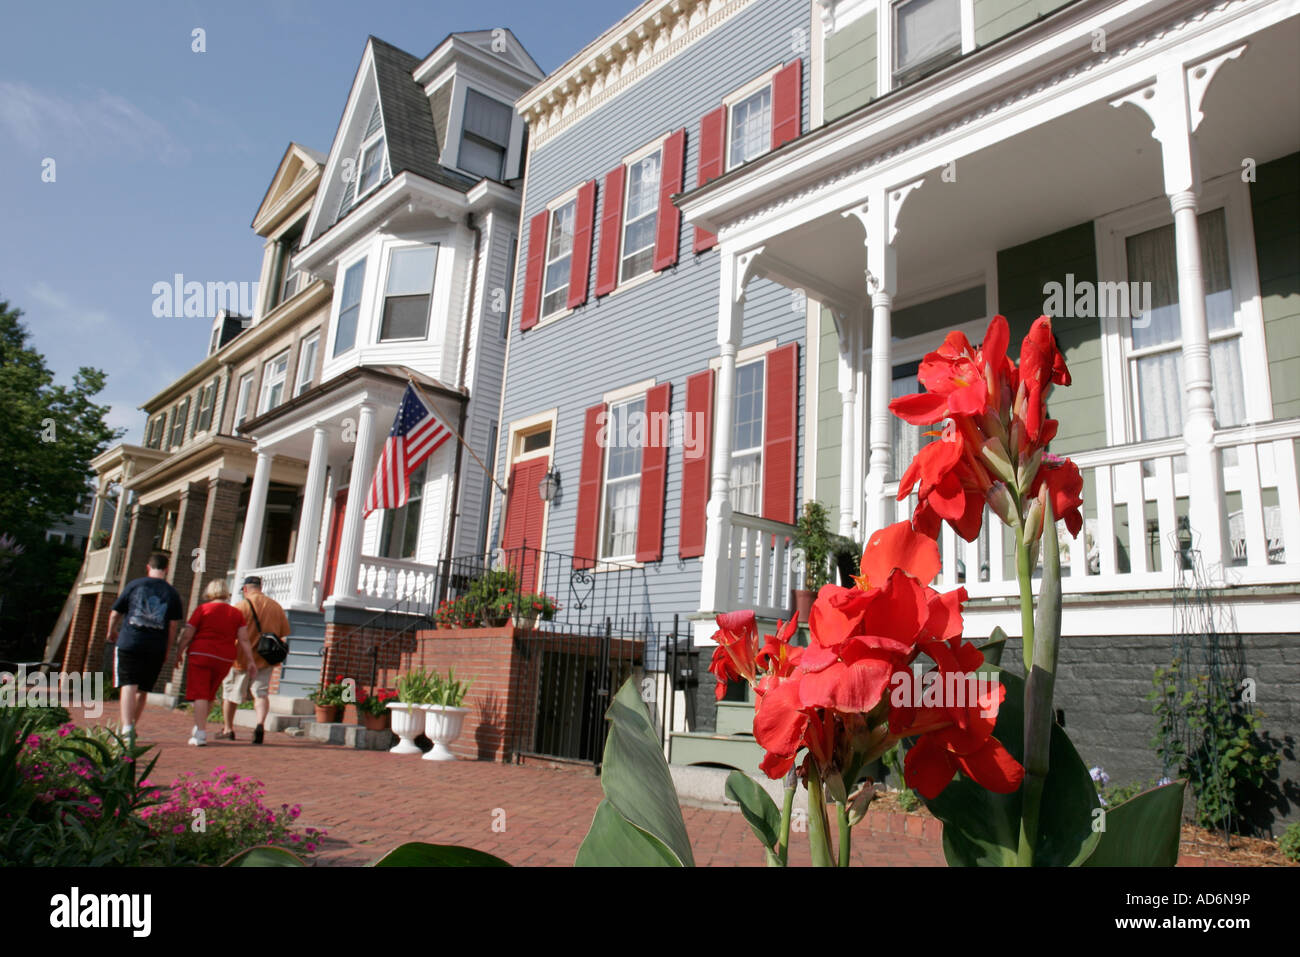 Portsmouth Virginia,Court Street,Olde Towne Historic District,flower flowers,flower flowers,porch,steps stairs staircase,flag,family families parent p Stock Photo